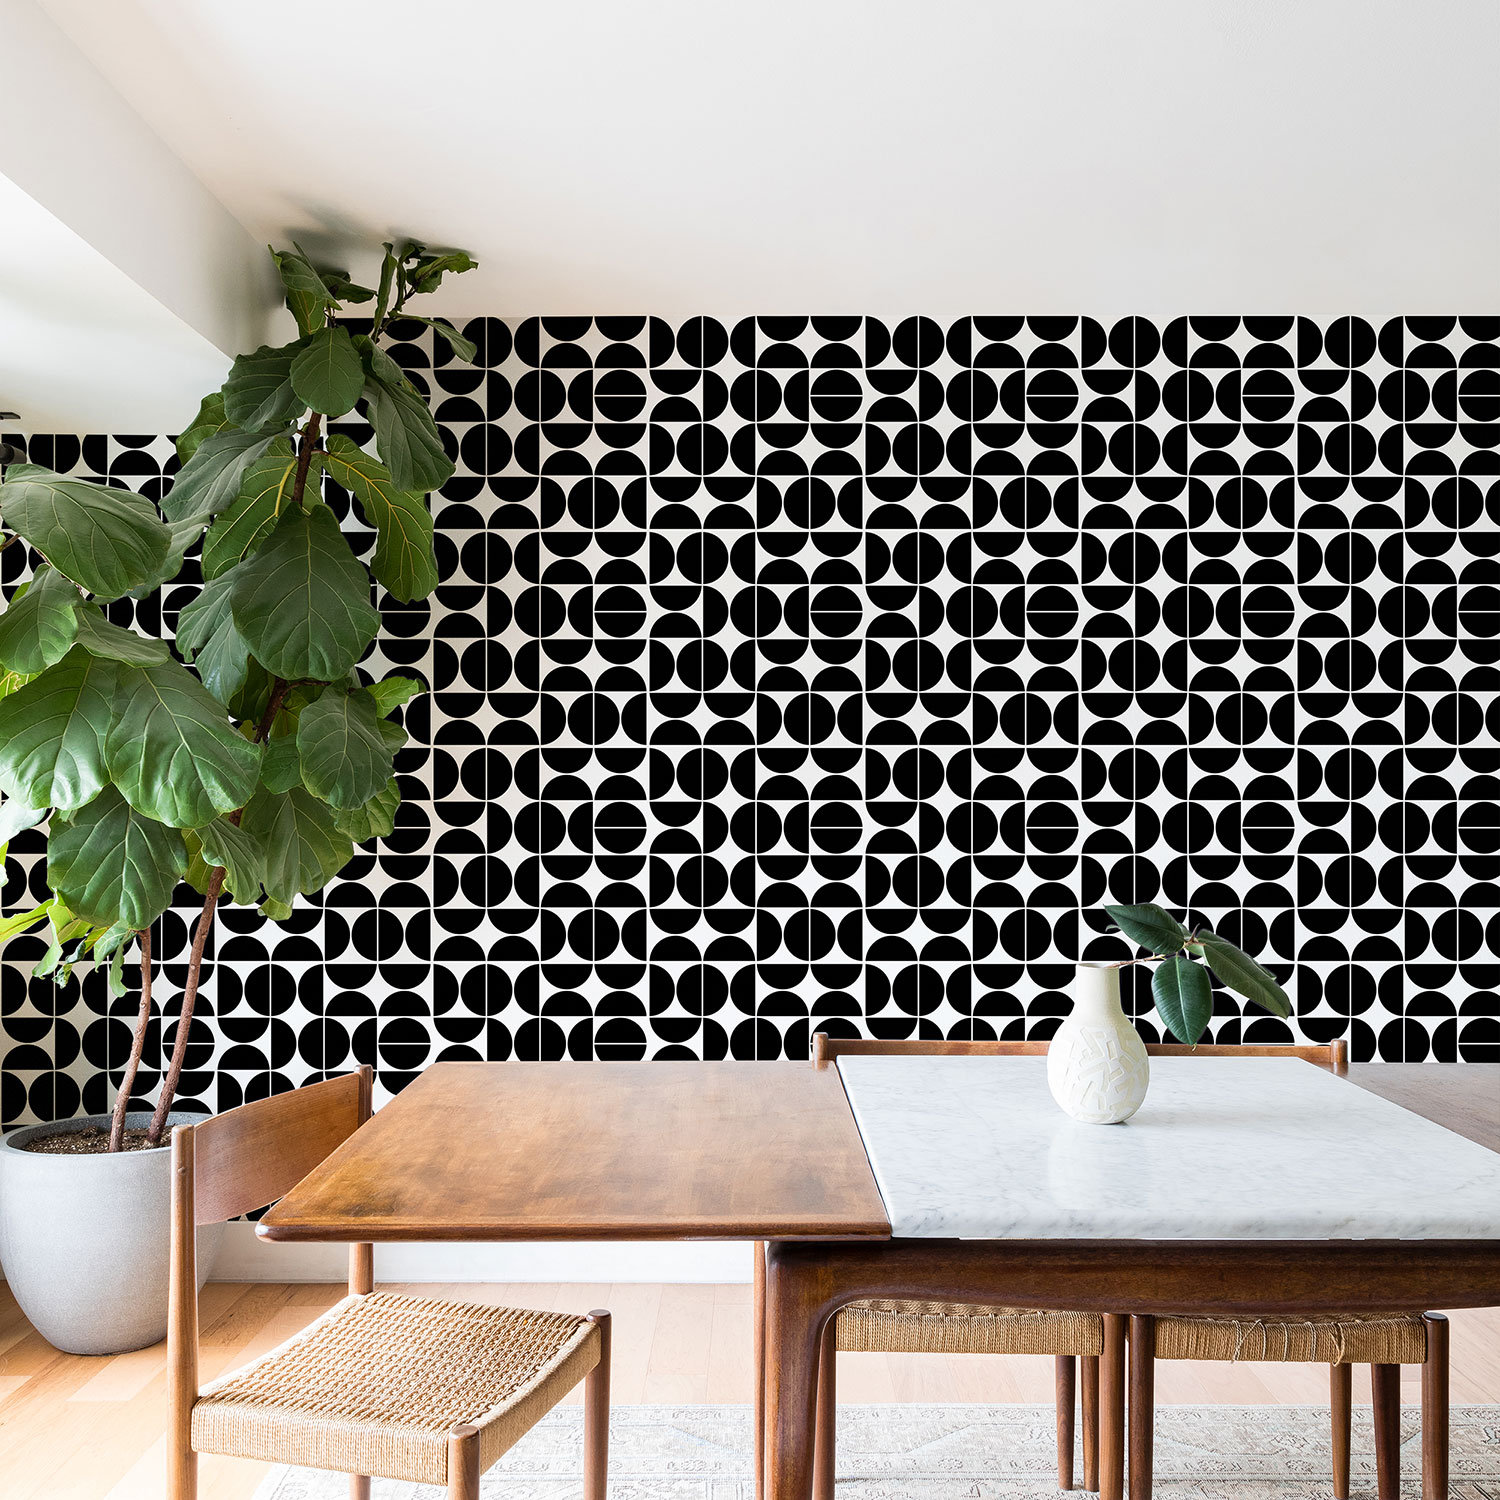 sourcing map Wall Paper Border Self Stick Wall Covering PVC Floor Borders  for Kitchen Bathroom Bedroom Wall Decor Paper, Leaves Pattern Gray Black